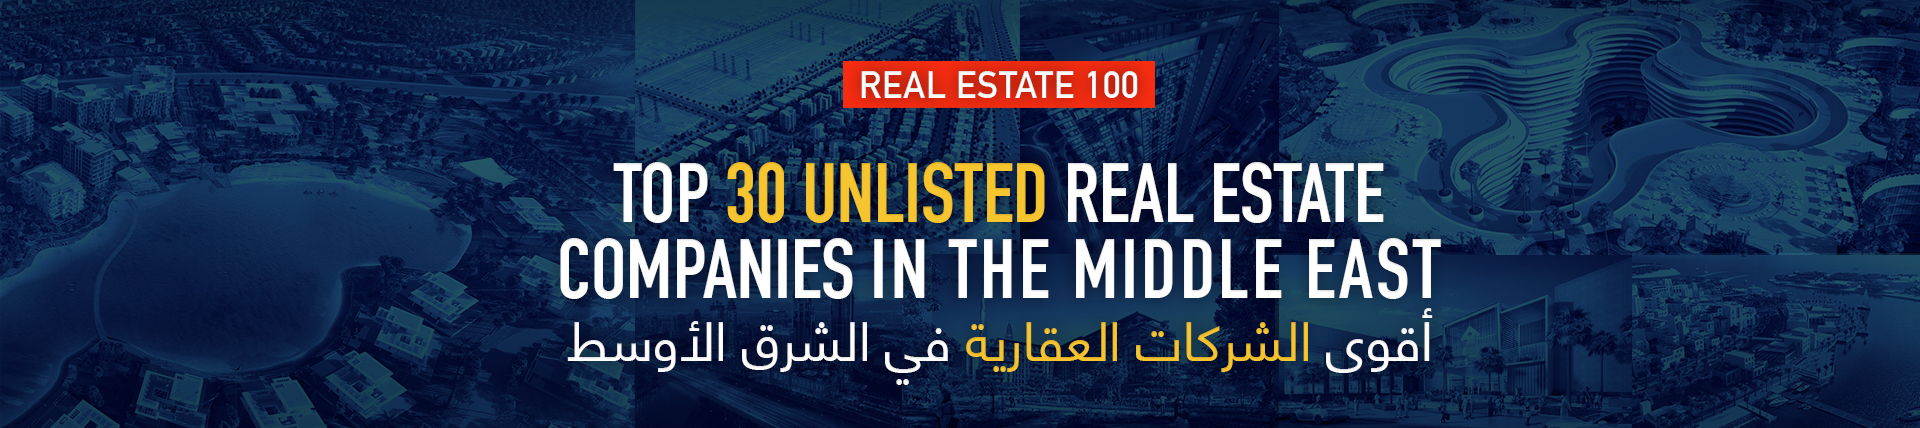 Top Unlisted Real Estate Companies in the Middle East 2019